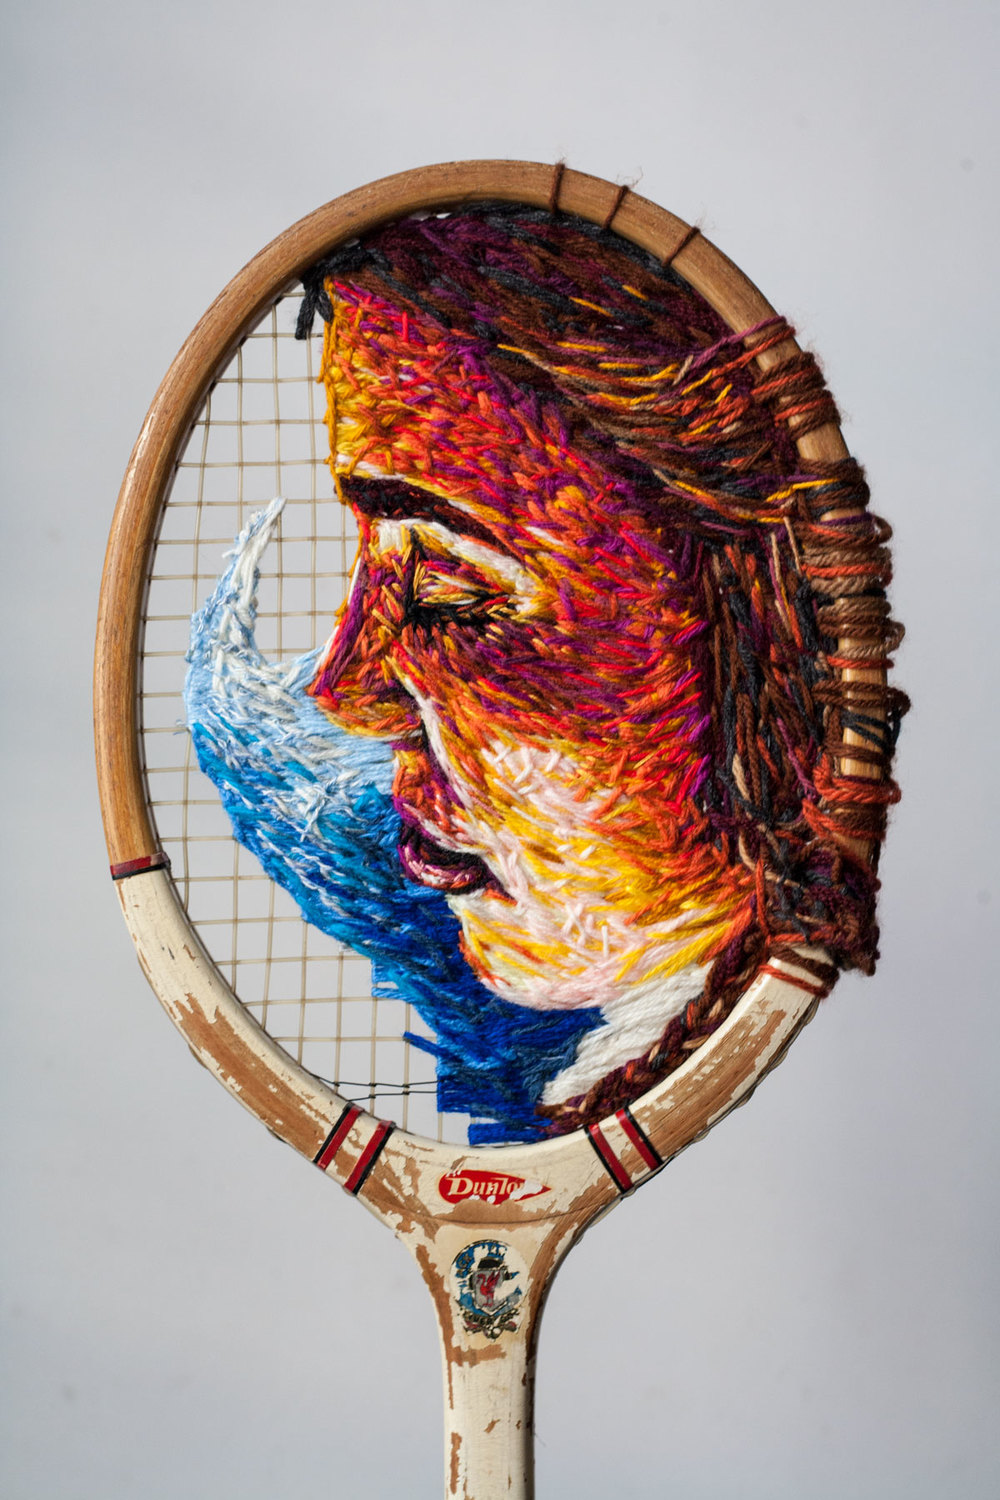 Marvelous Embroideries Made In Unusual Places By Danielle Clough 14